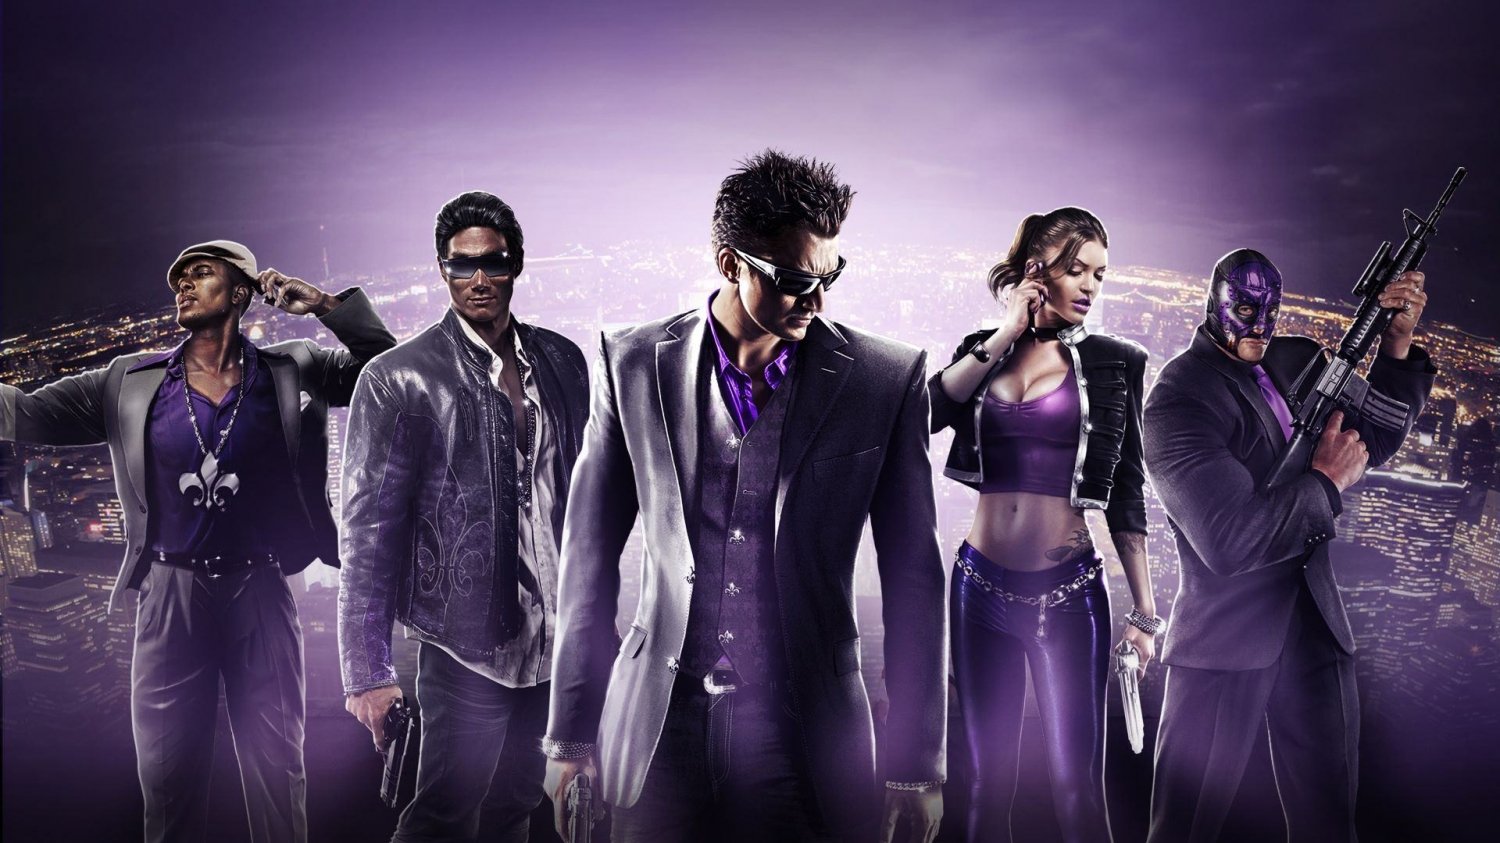 THQ Nordic acquires Deep Silver, meaning Saints Row is back at THQ